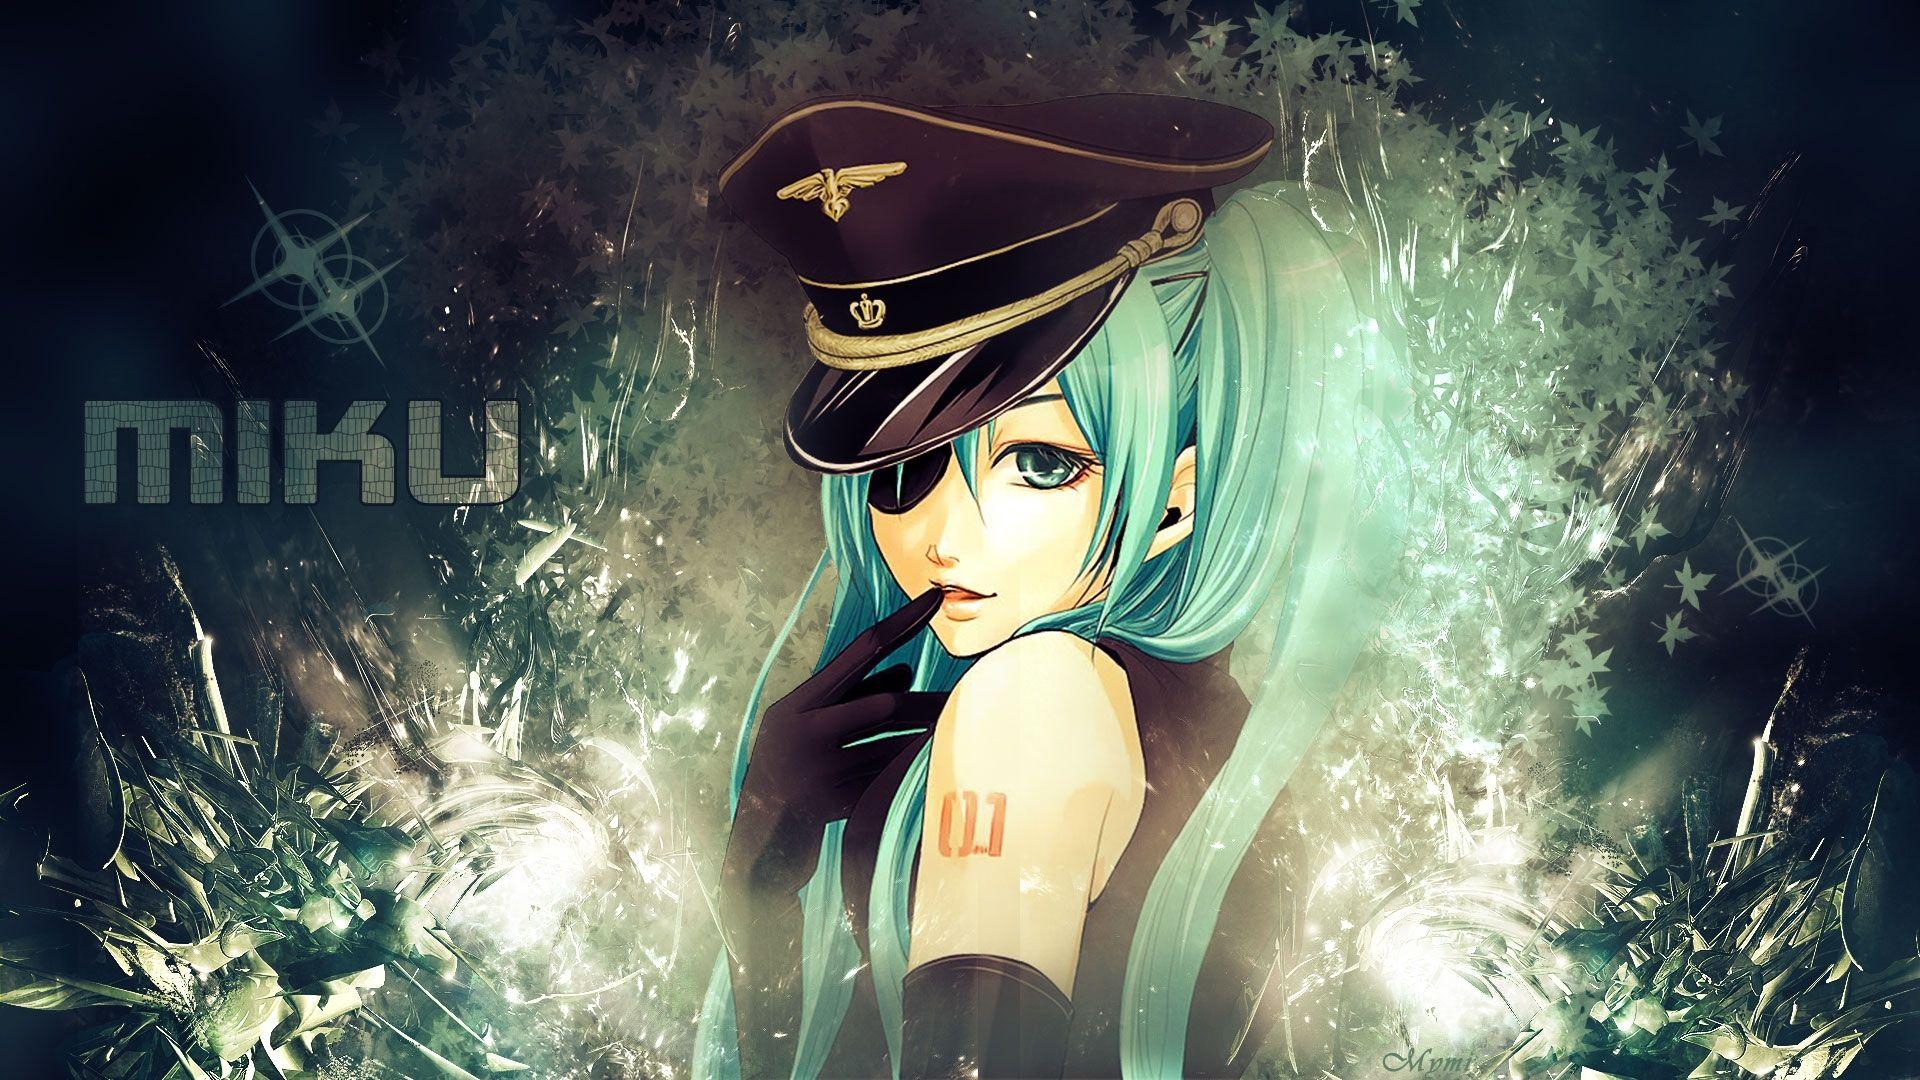 Wallpapers : illustration, anime, space, black hair, graphic design